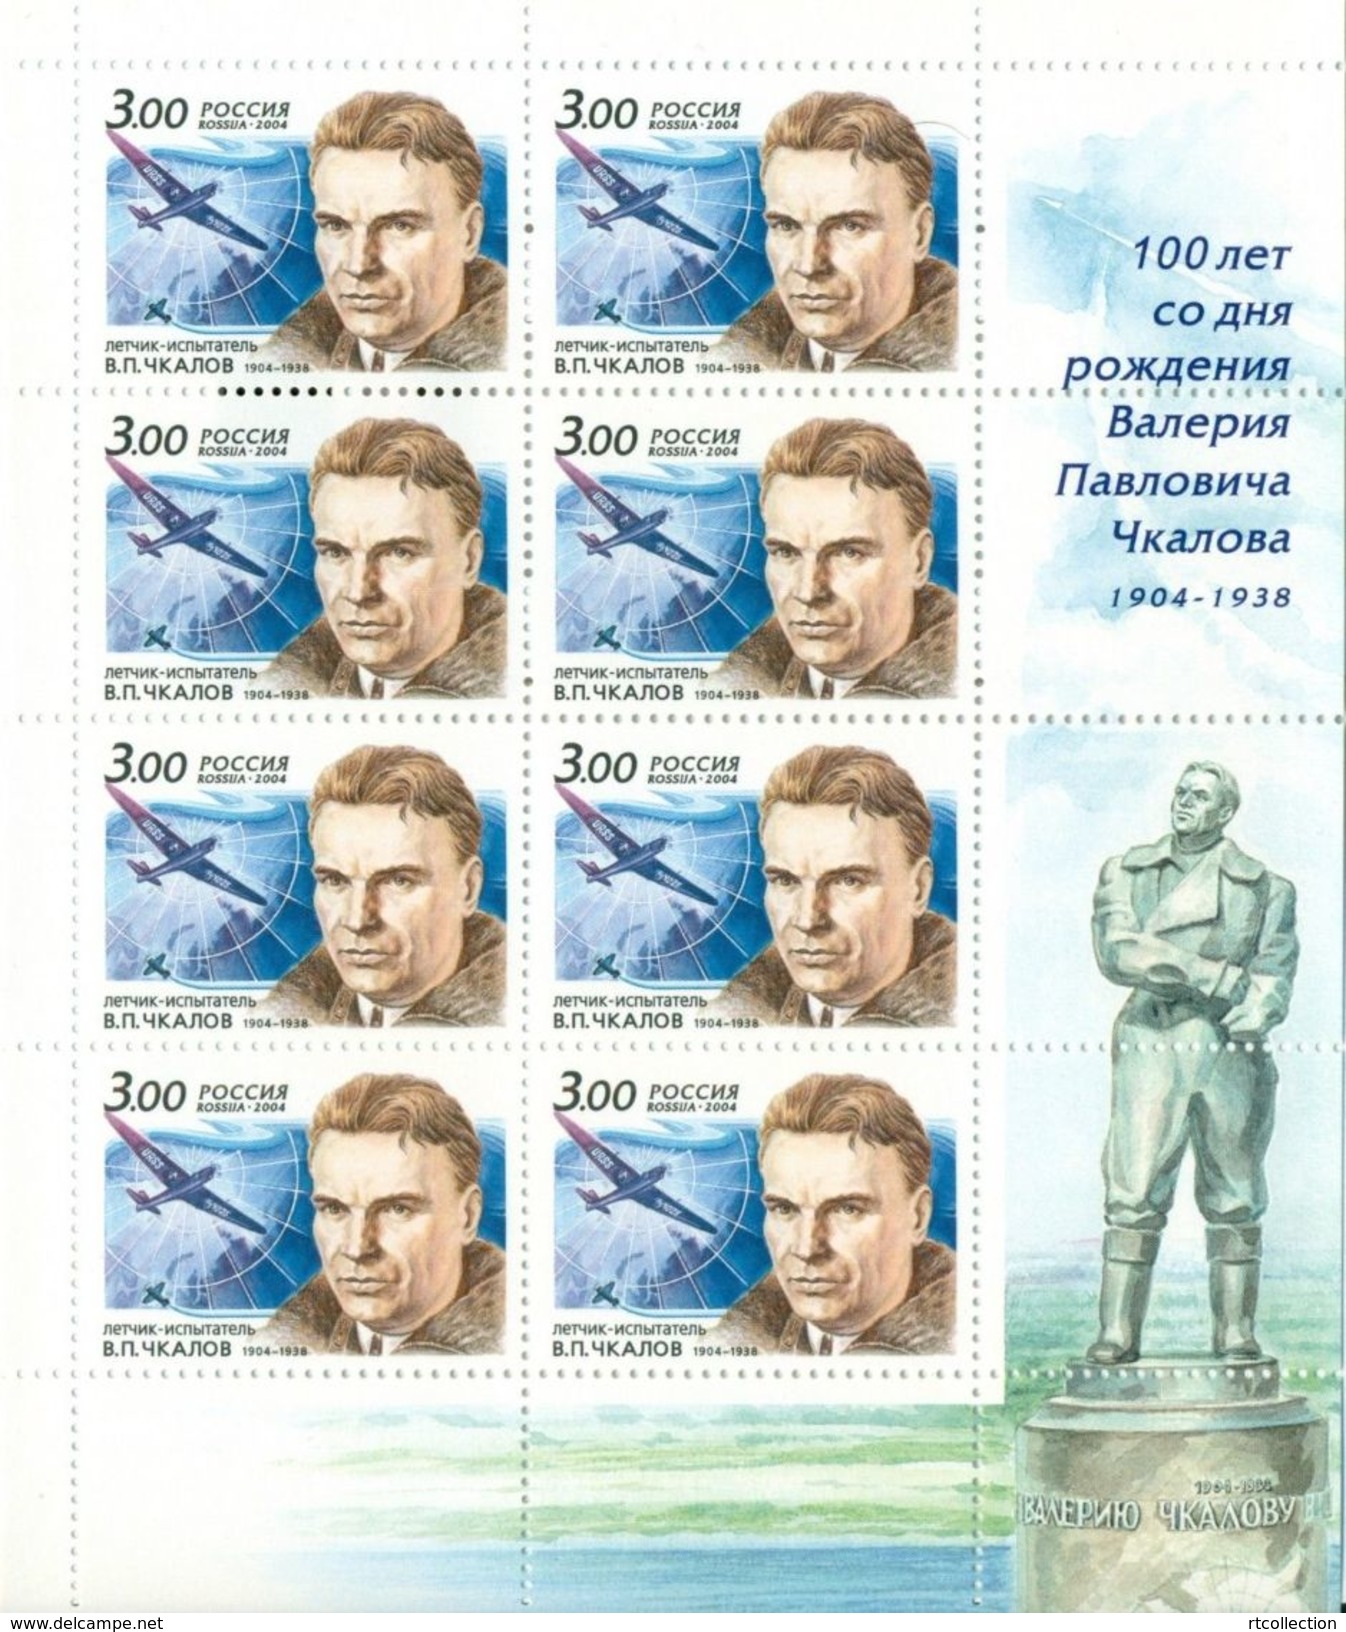 Russia 2004 Sheet 100Y Birth Chkalov Test Pilot People Plane Aircraft Airplane Celebrations Stamps MNH Mi 1143 SC 6814 - Collections